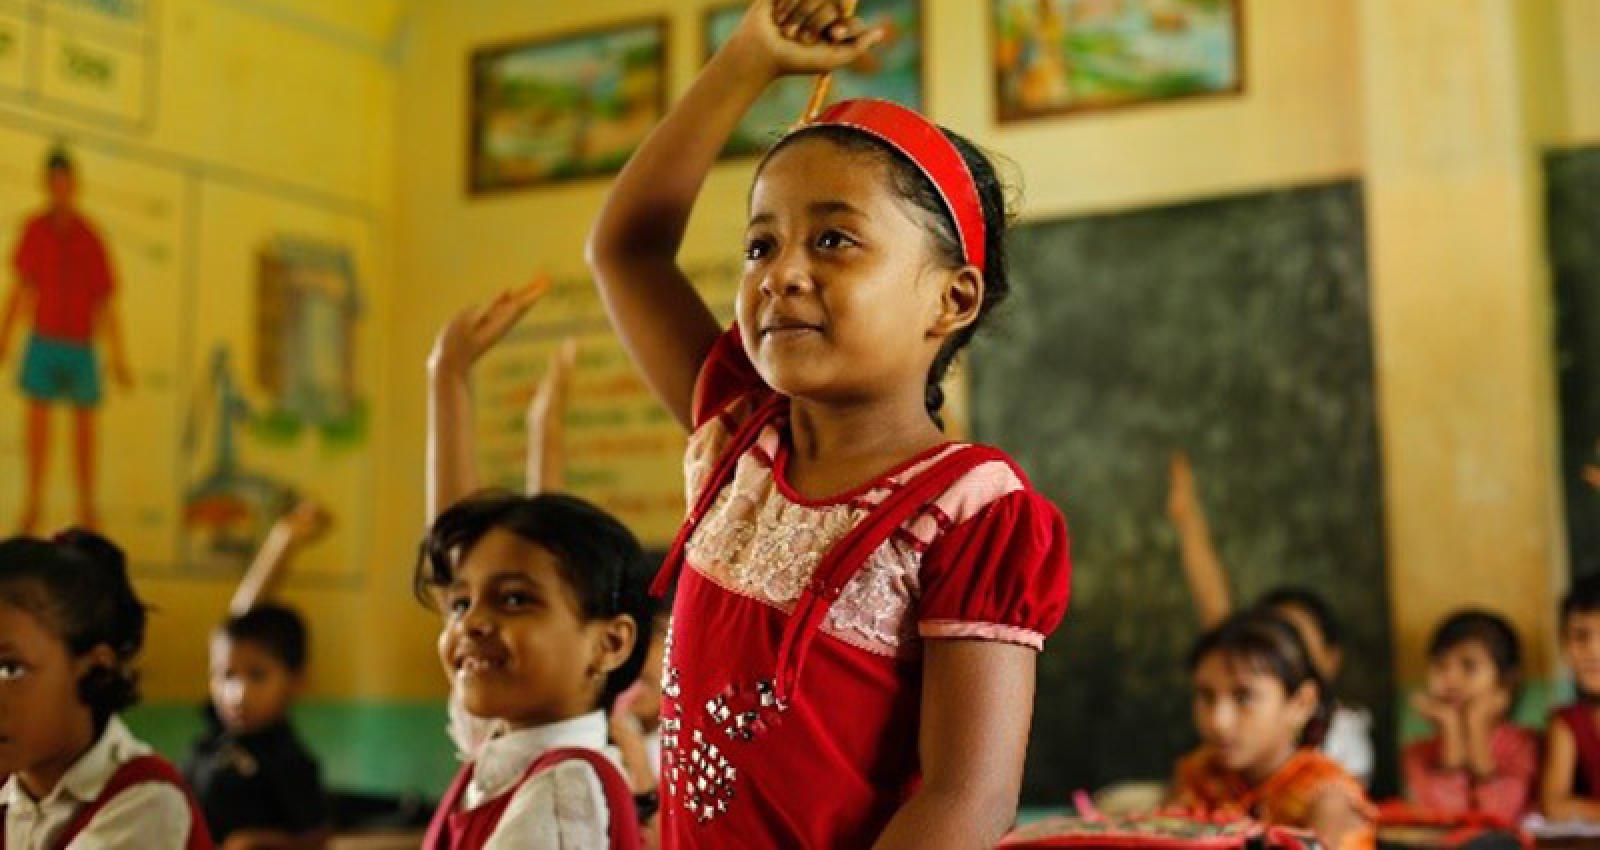 Improving Children's Learning and School Participation in Developing Countries – What Works?